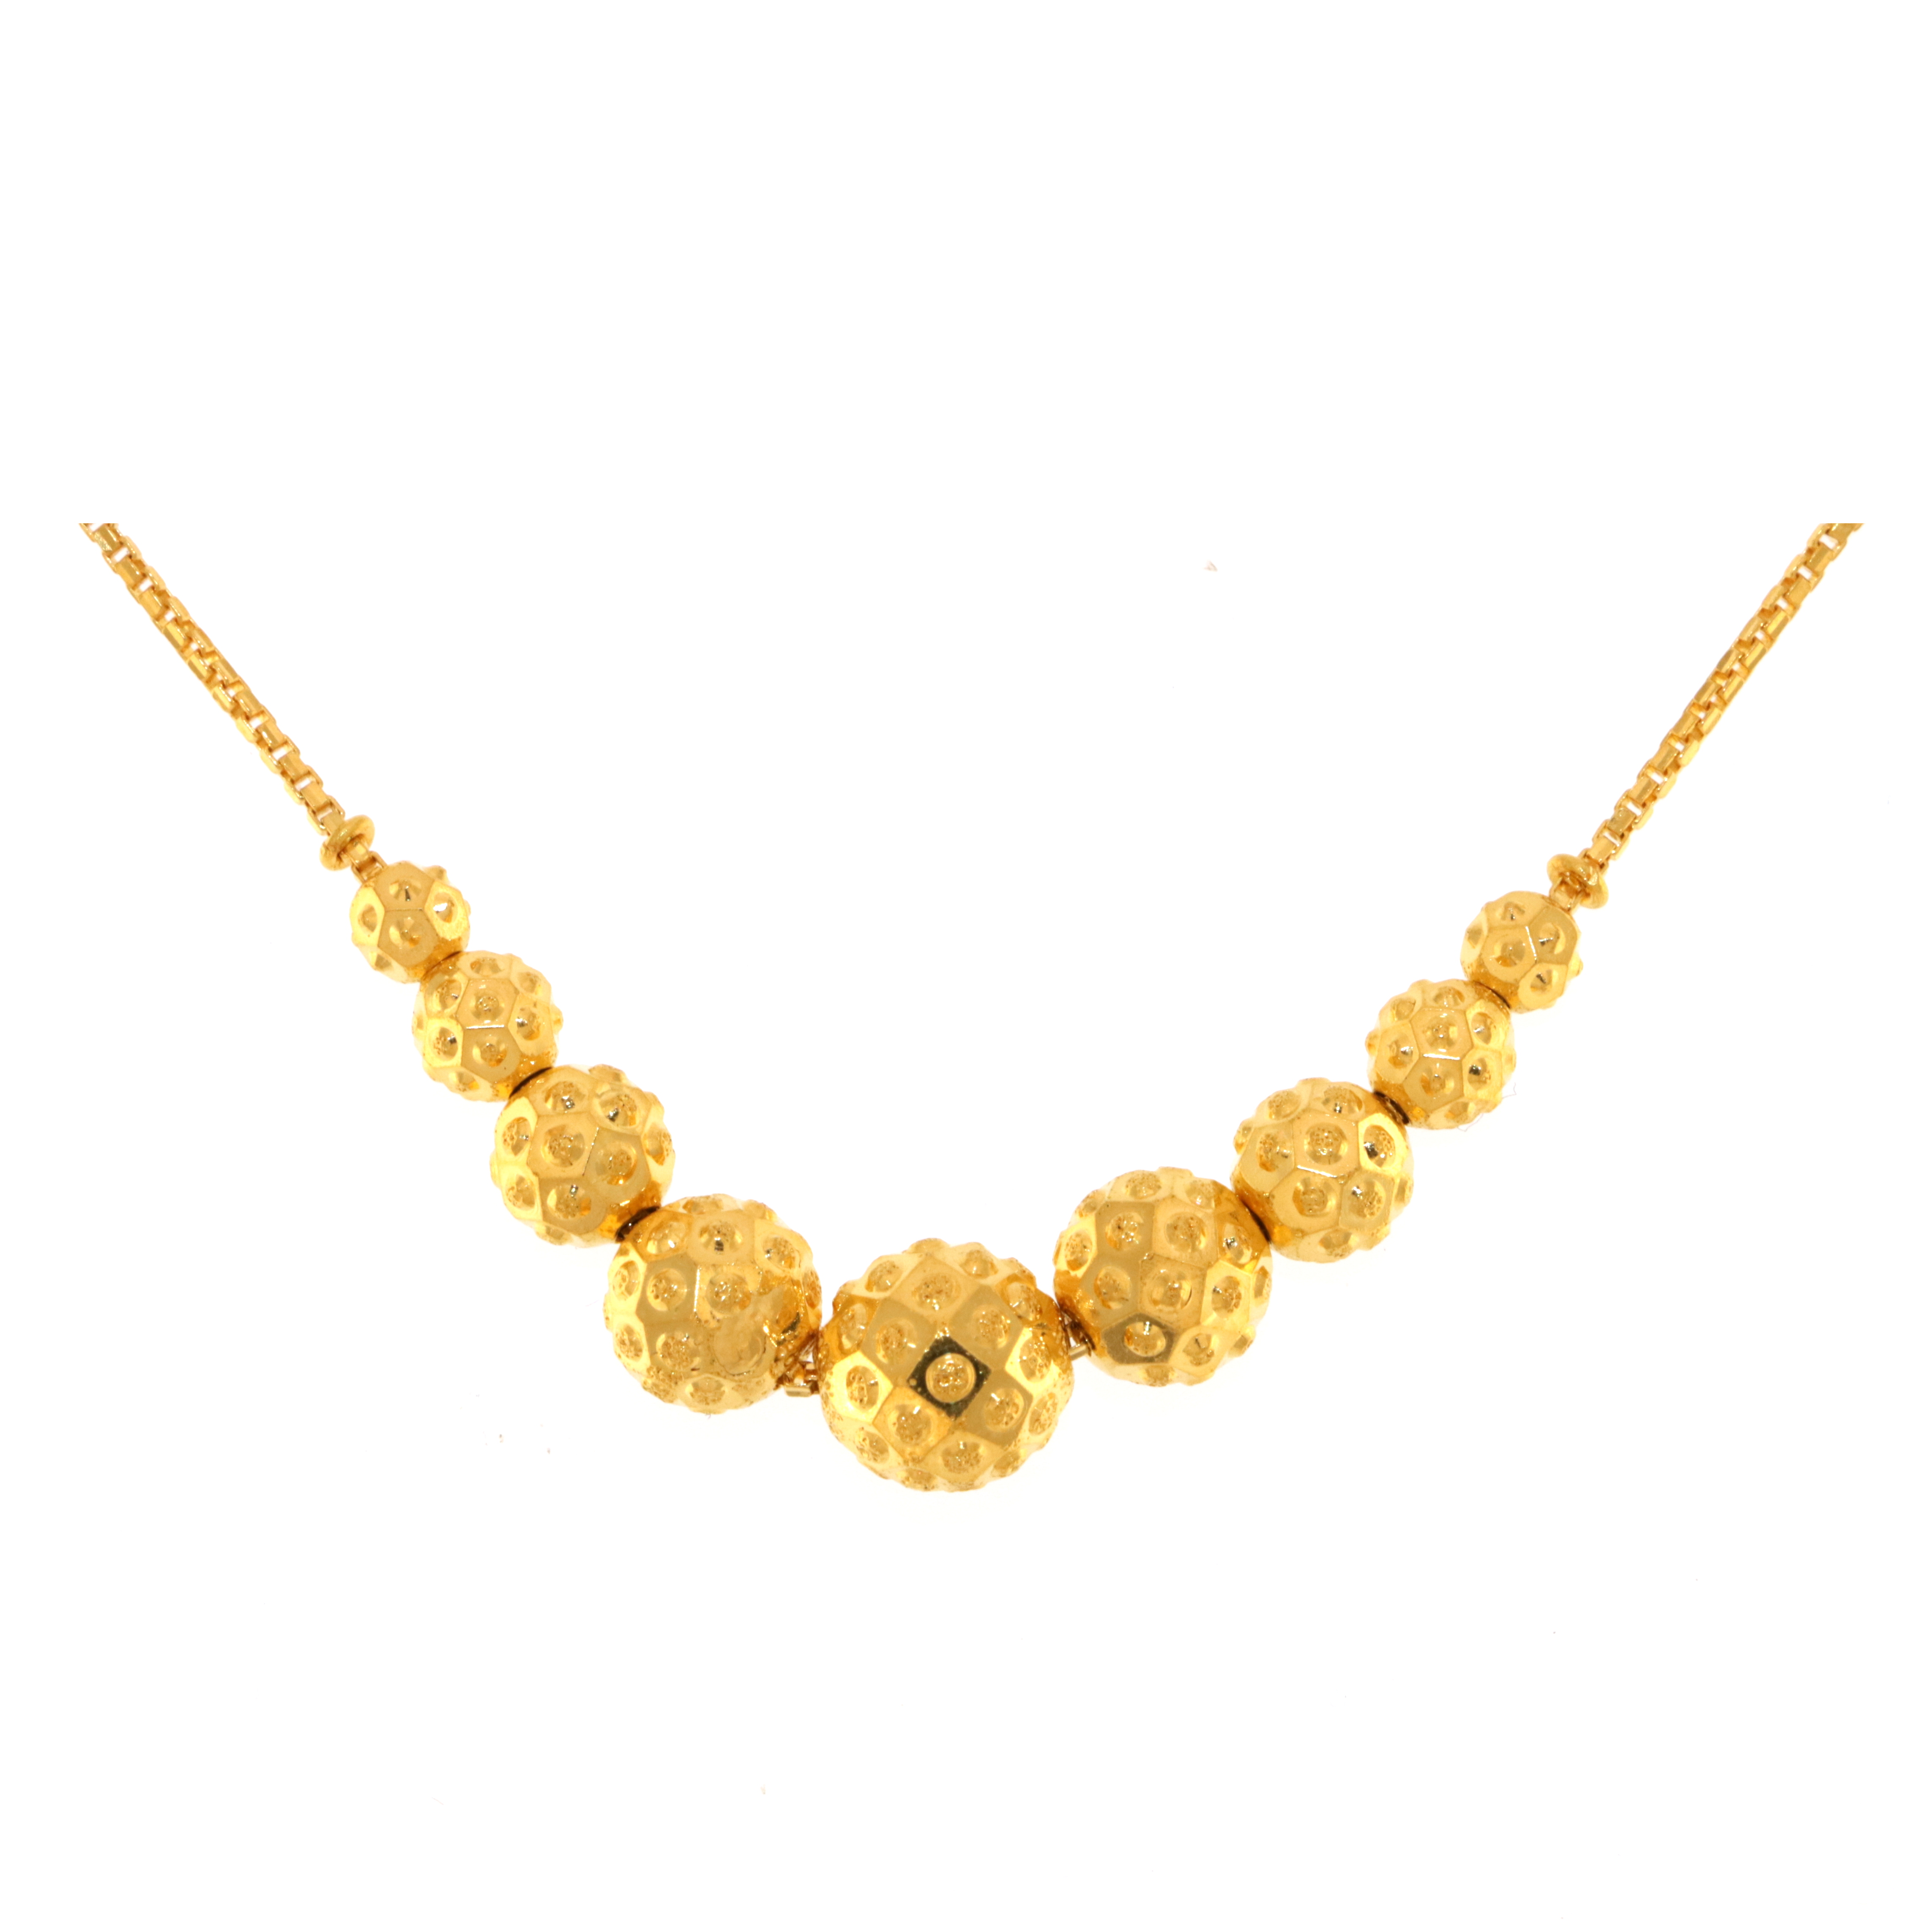 22ct Gold Necklace/Mala